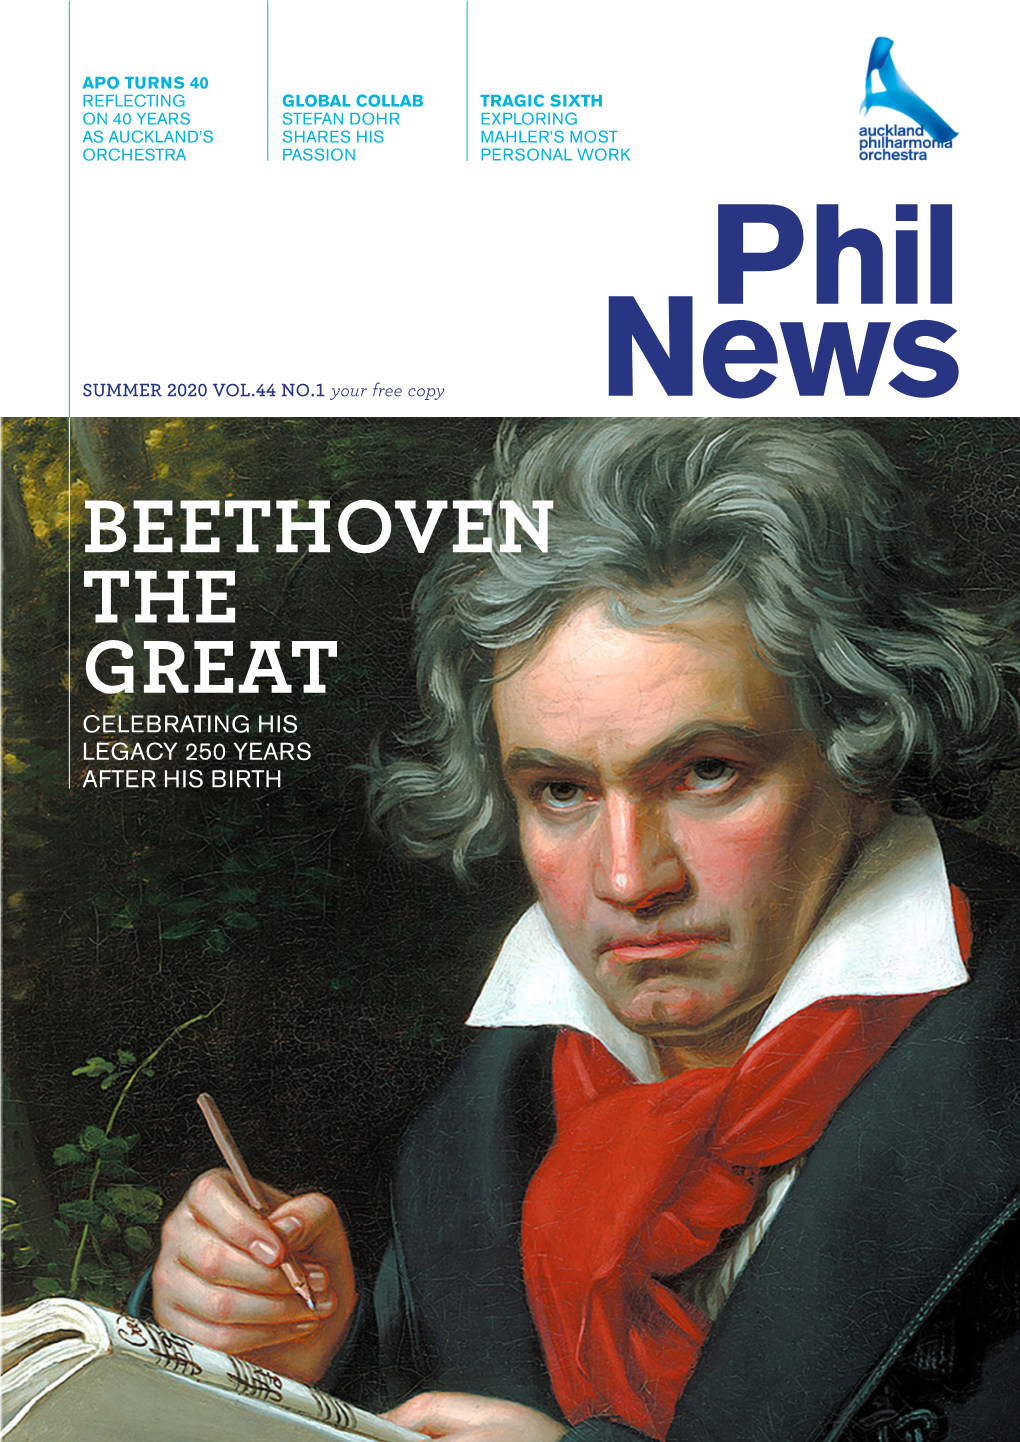 Beethoven the Great Celebrating His Legacy 250 Years After His Birth All About Auckl Nd 40 Years